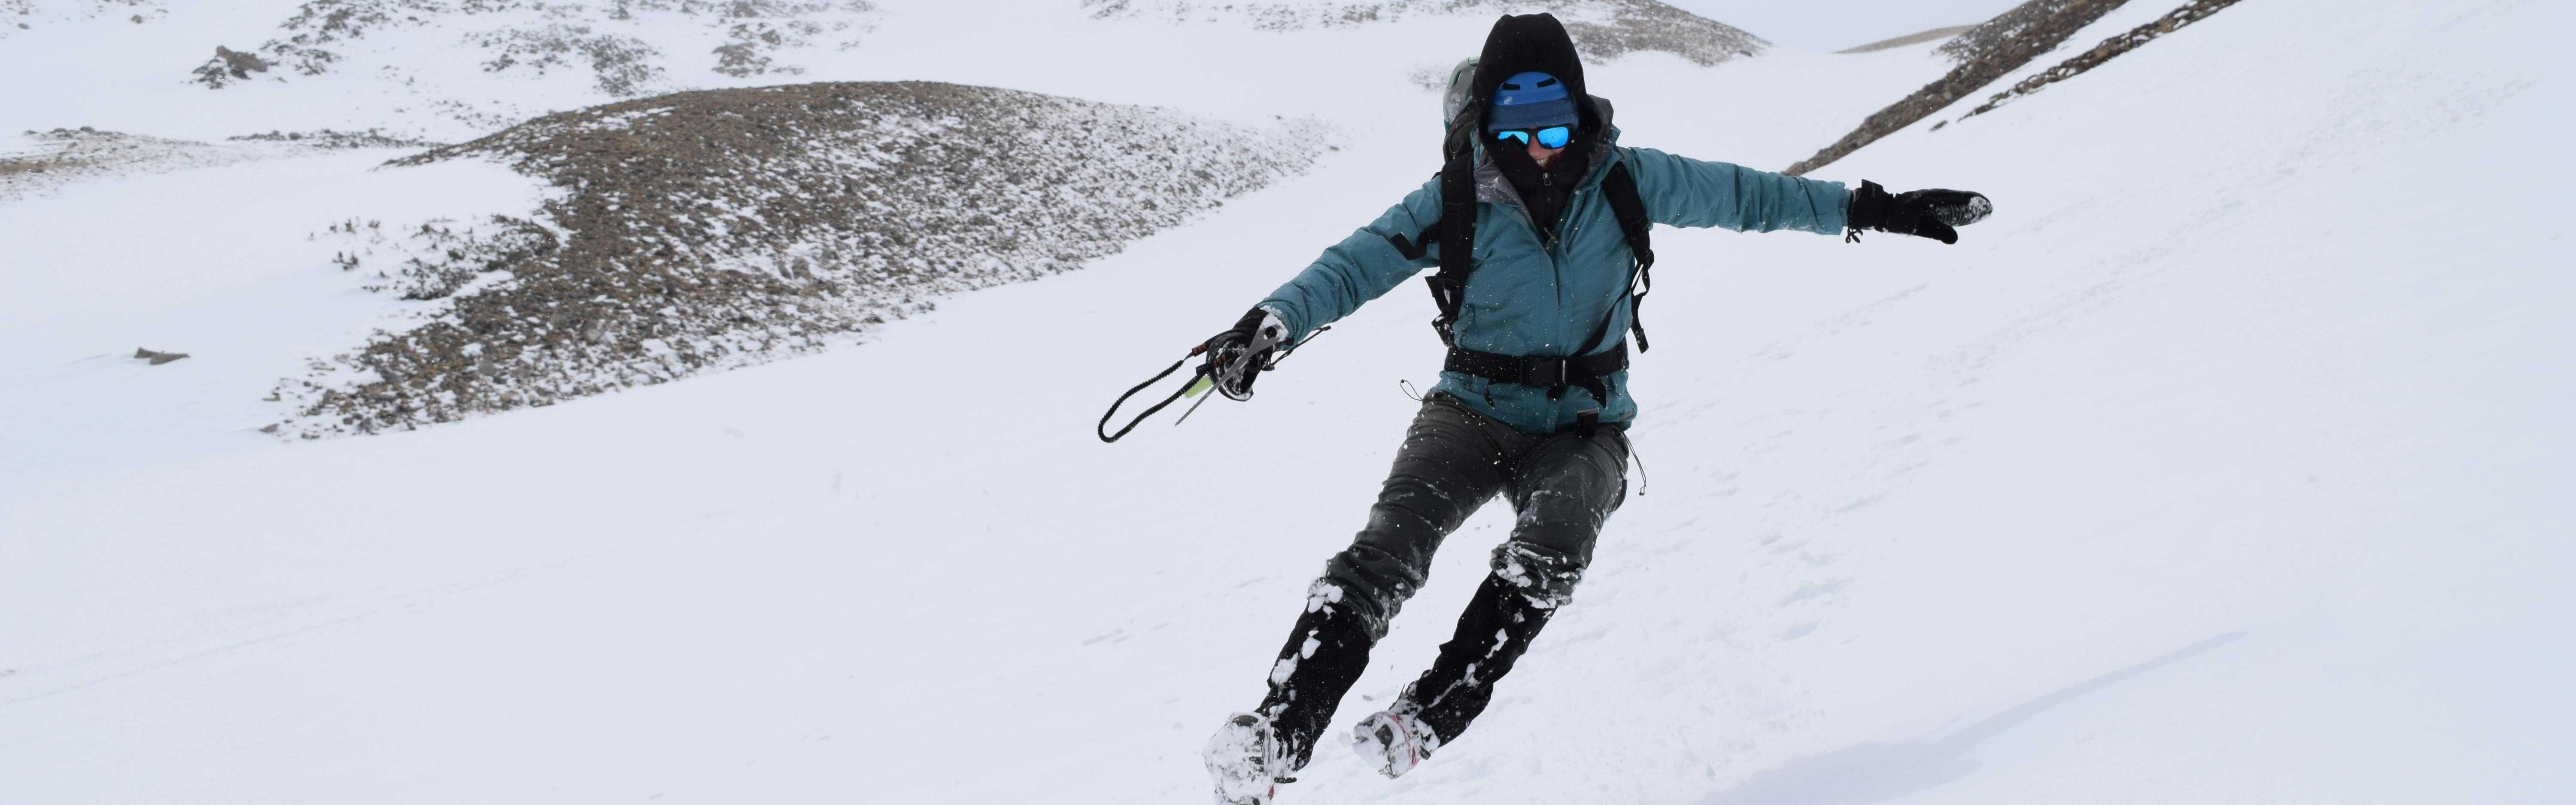 A hiker in a turquoise jacket running down a slope in the snow